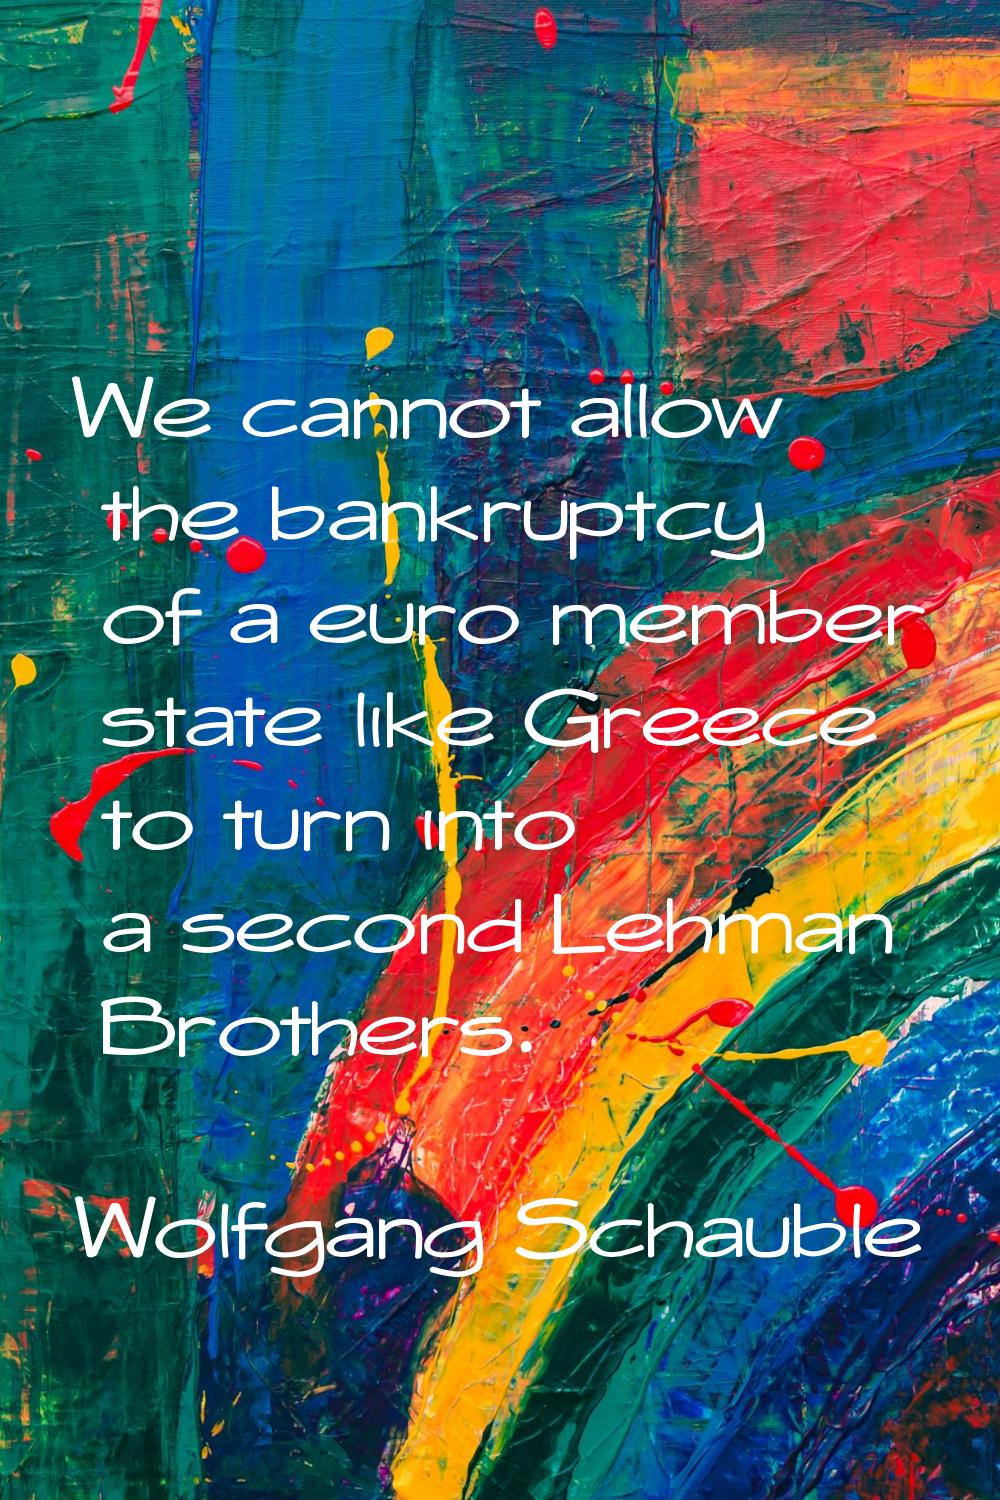 We cannot allow the bankruptcy of a euro member state like Greece to turn into a second Lehman Brot